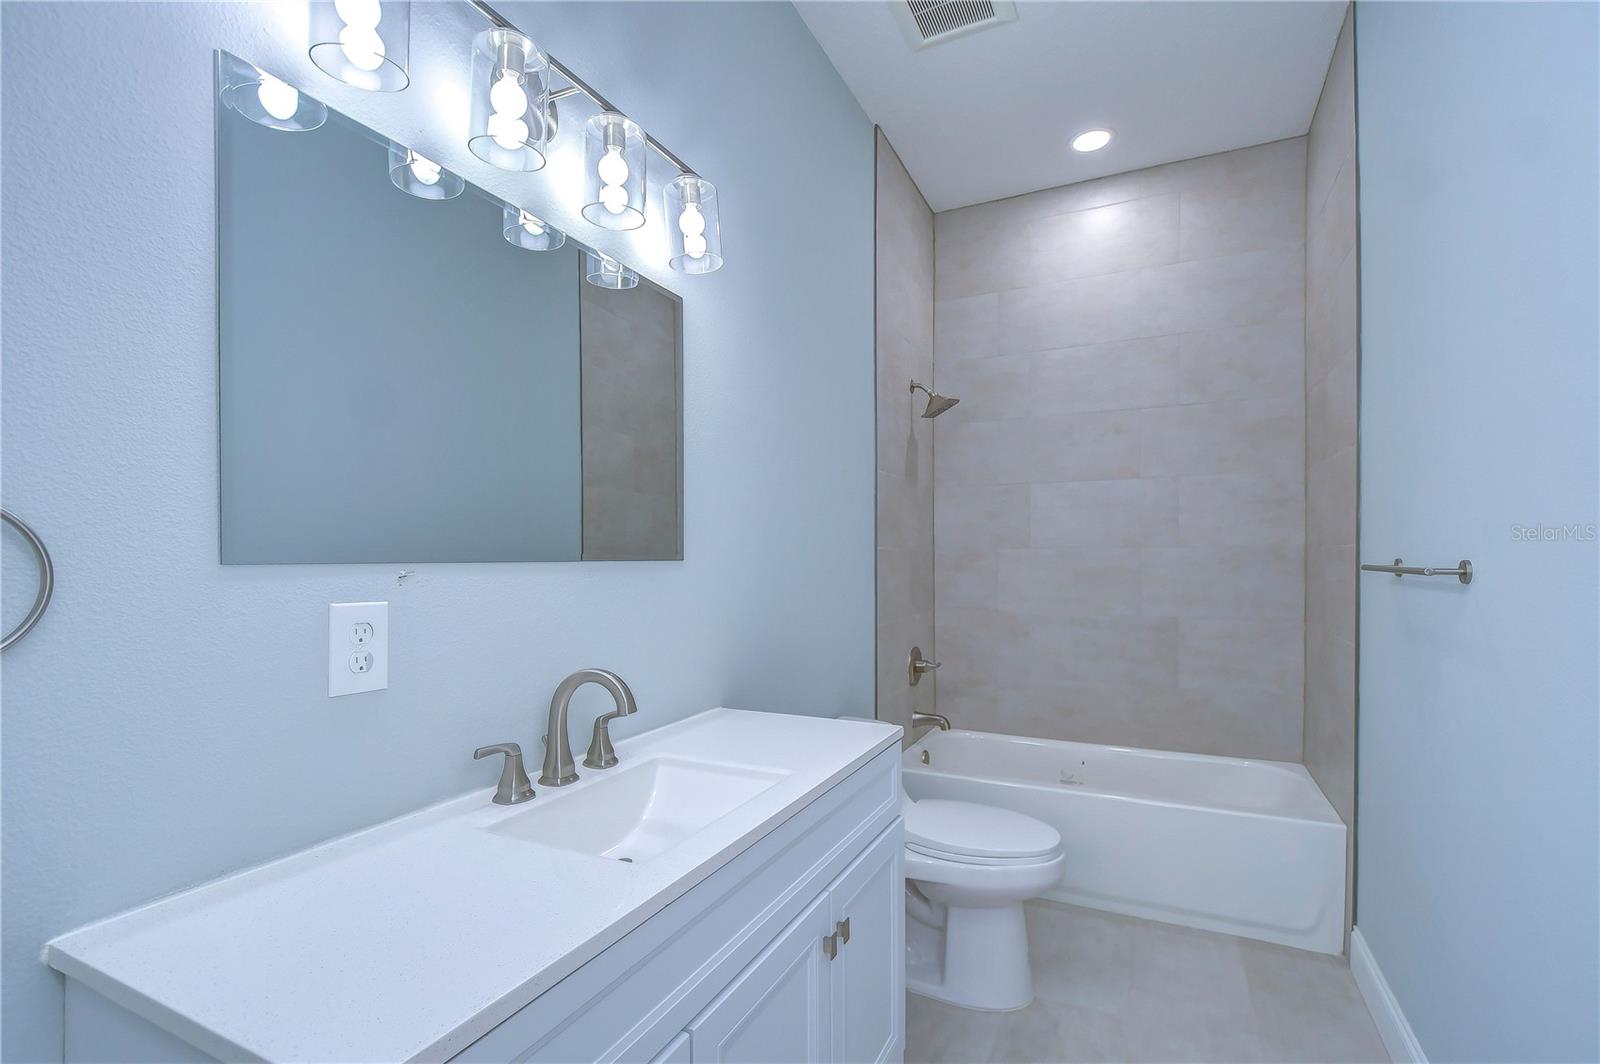 The hall bathroom features a large vanity with quartz countertop and bathtub for soaking your cares away.